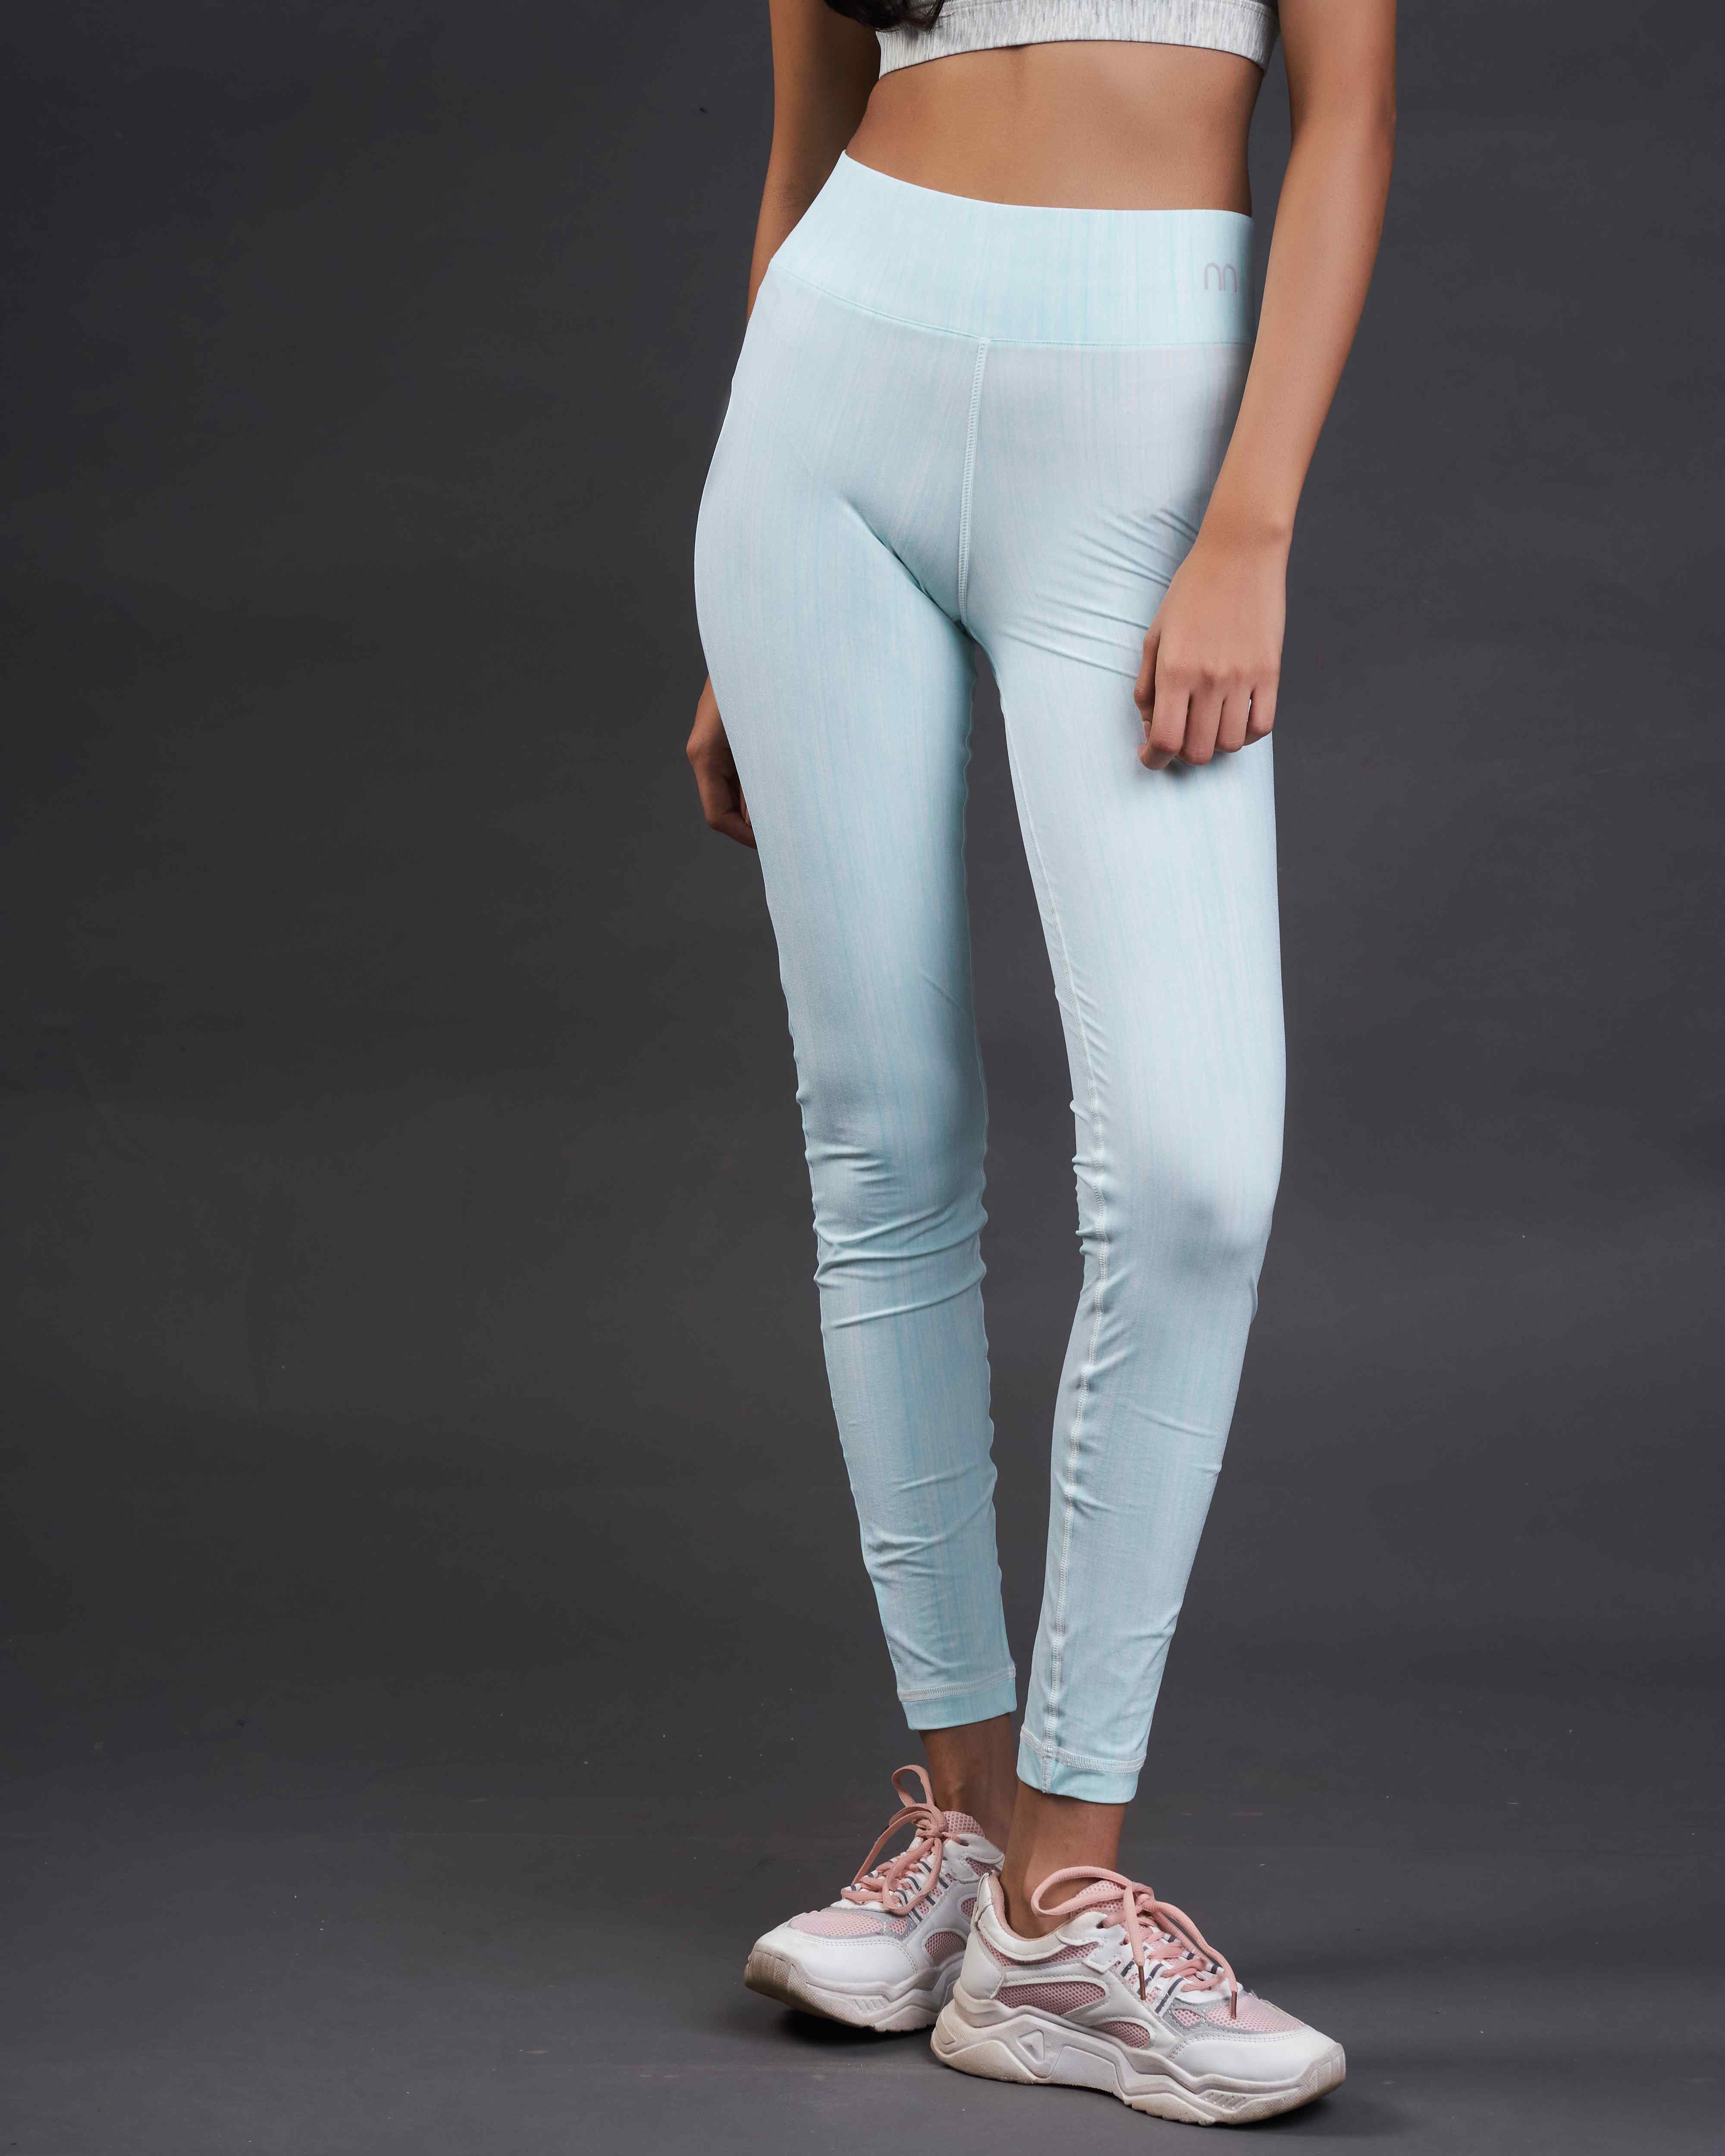 Runn Active Wear Printed Athleisure Fit-Mint